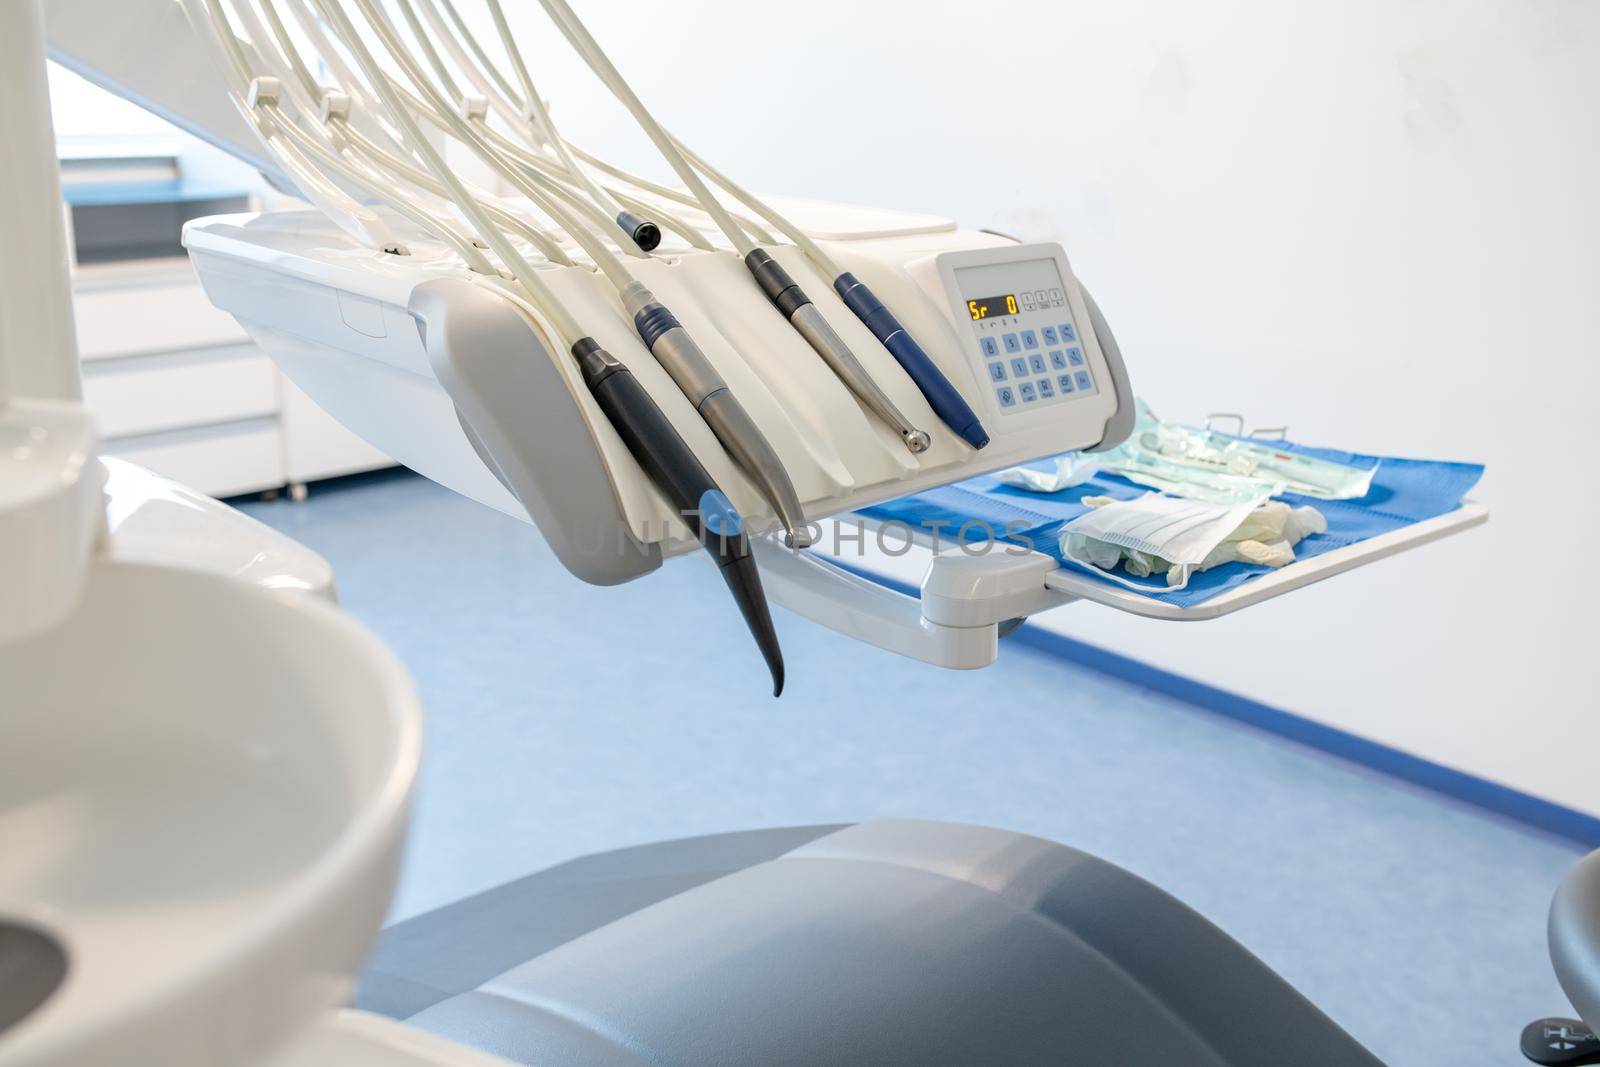 Modern dental practice. Dental chair and other accessories used by dentists